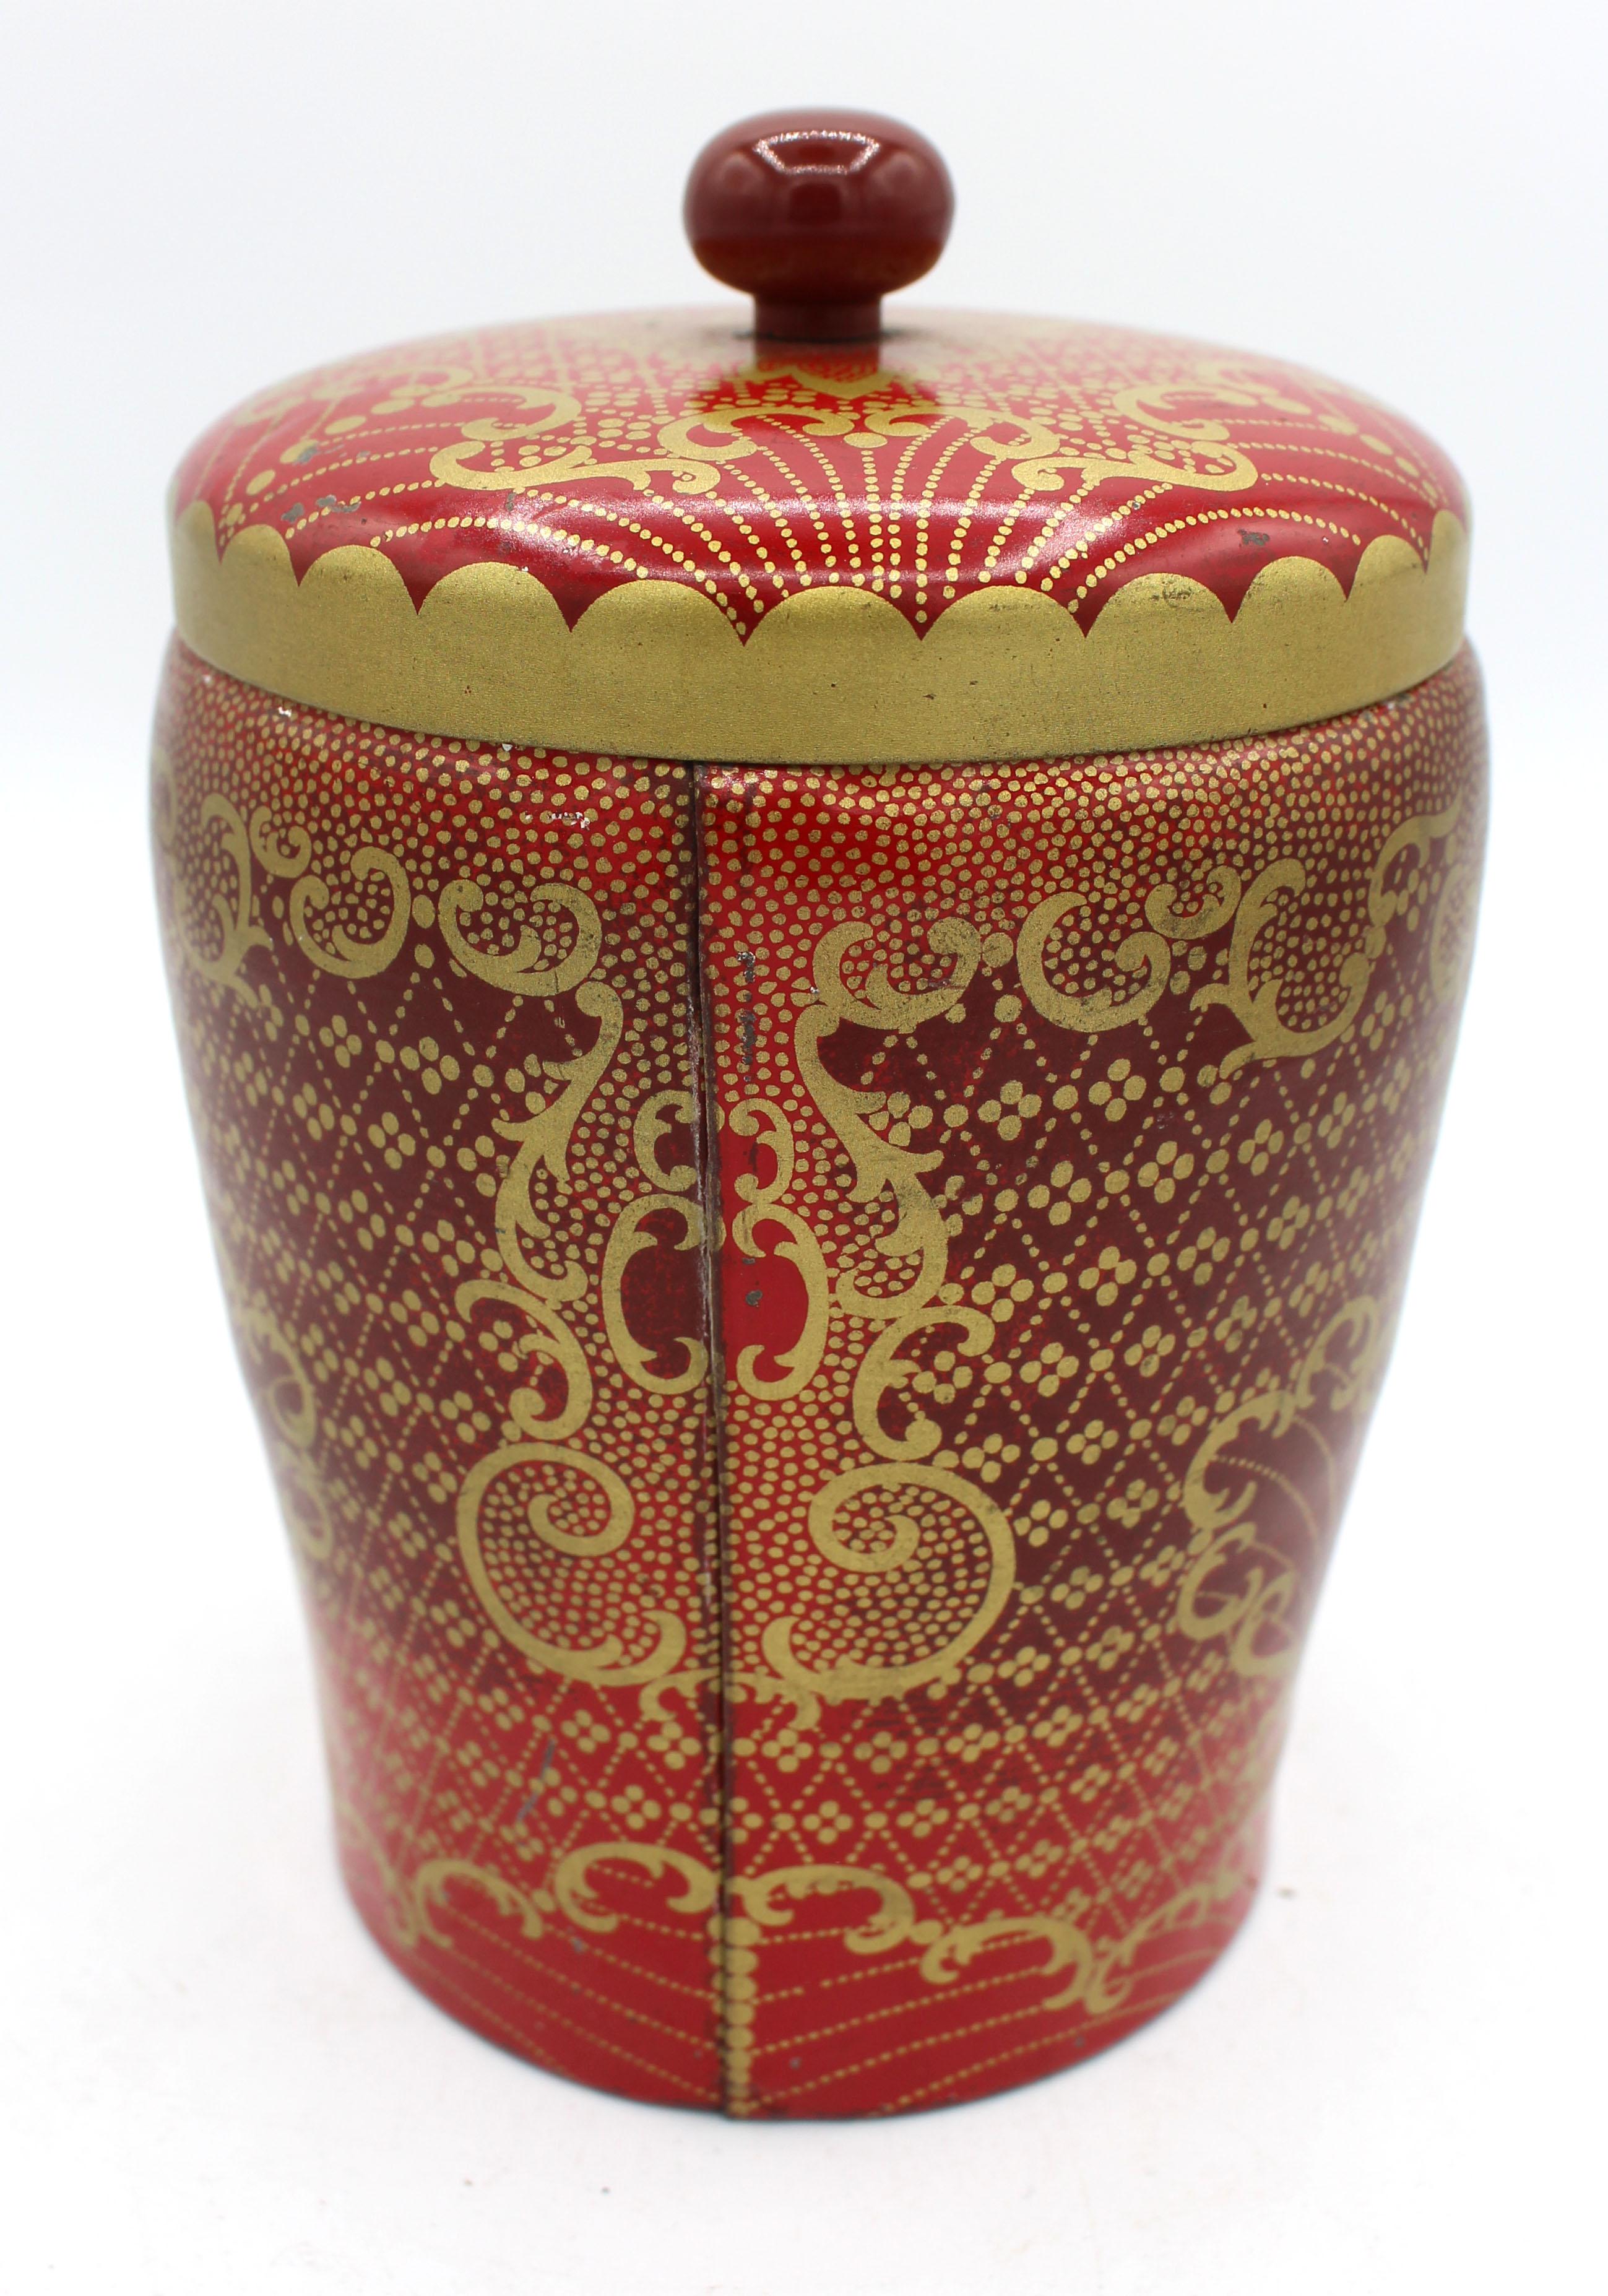 Circa 1937 Huntley & Palmers lidded barrel form biscuit tin box. Scarlet gilt Queen Anne chinoiserie lacquer motif. See matching example in the M.J. Franklin Collection of the Victoria & Albert Museum.
4 5/8